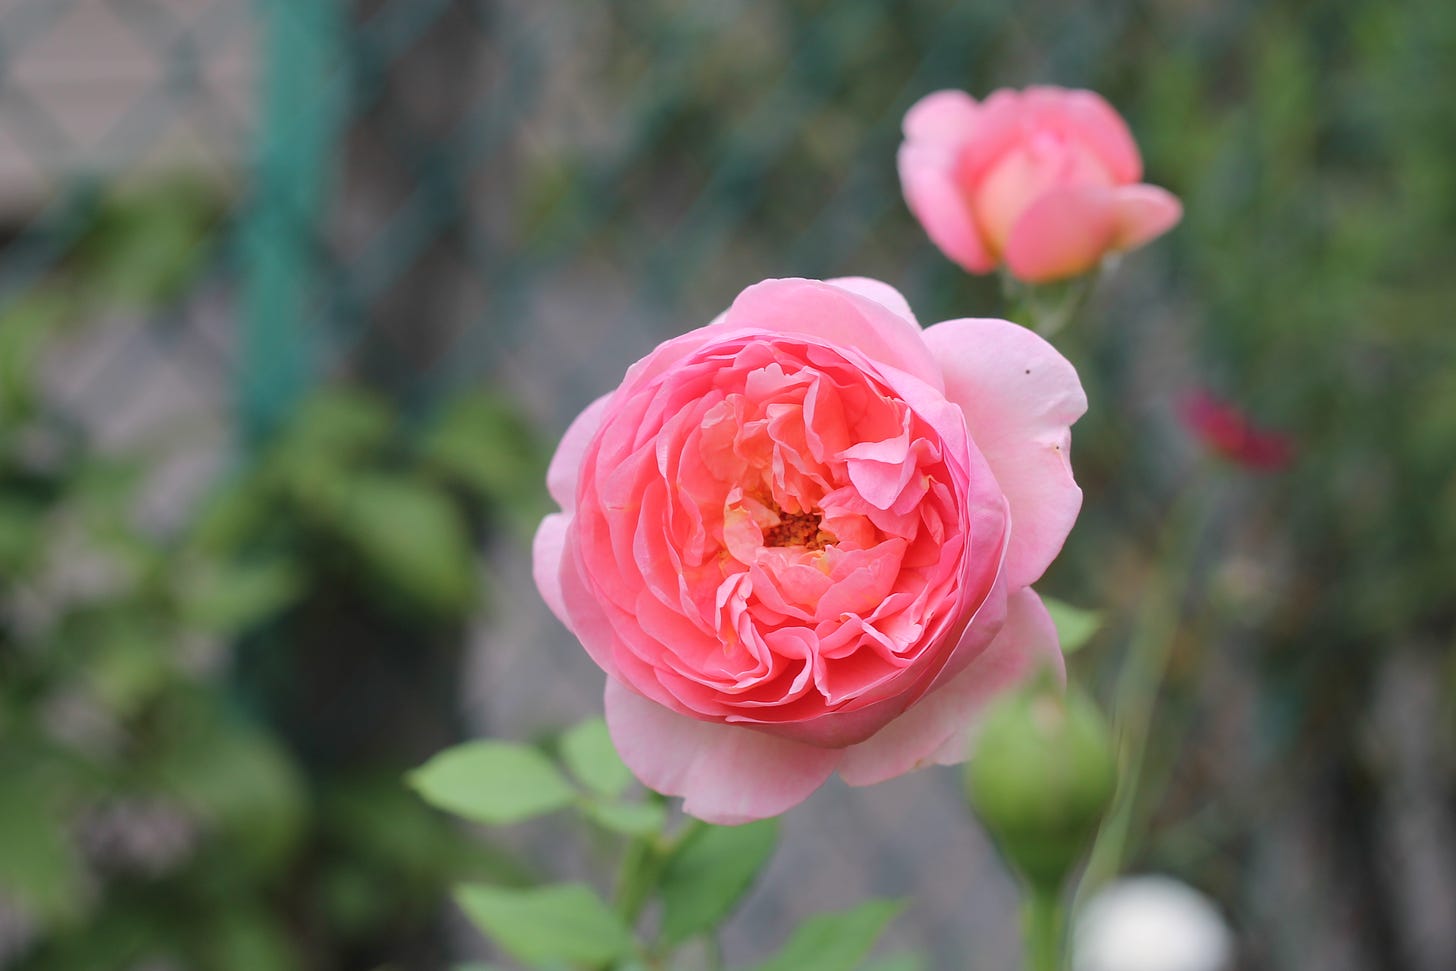 Closeup of a salmon pink, ruffly rose, with another more closed up bloom blurred in the background.